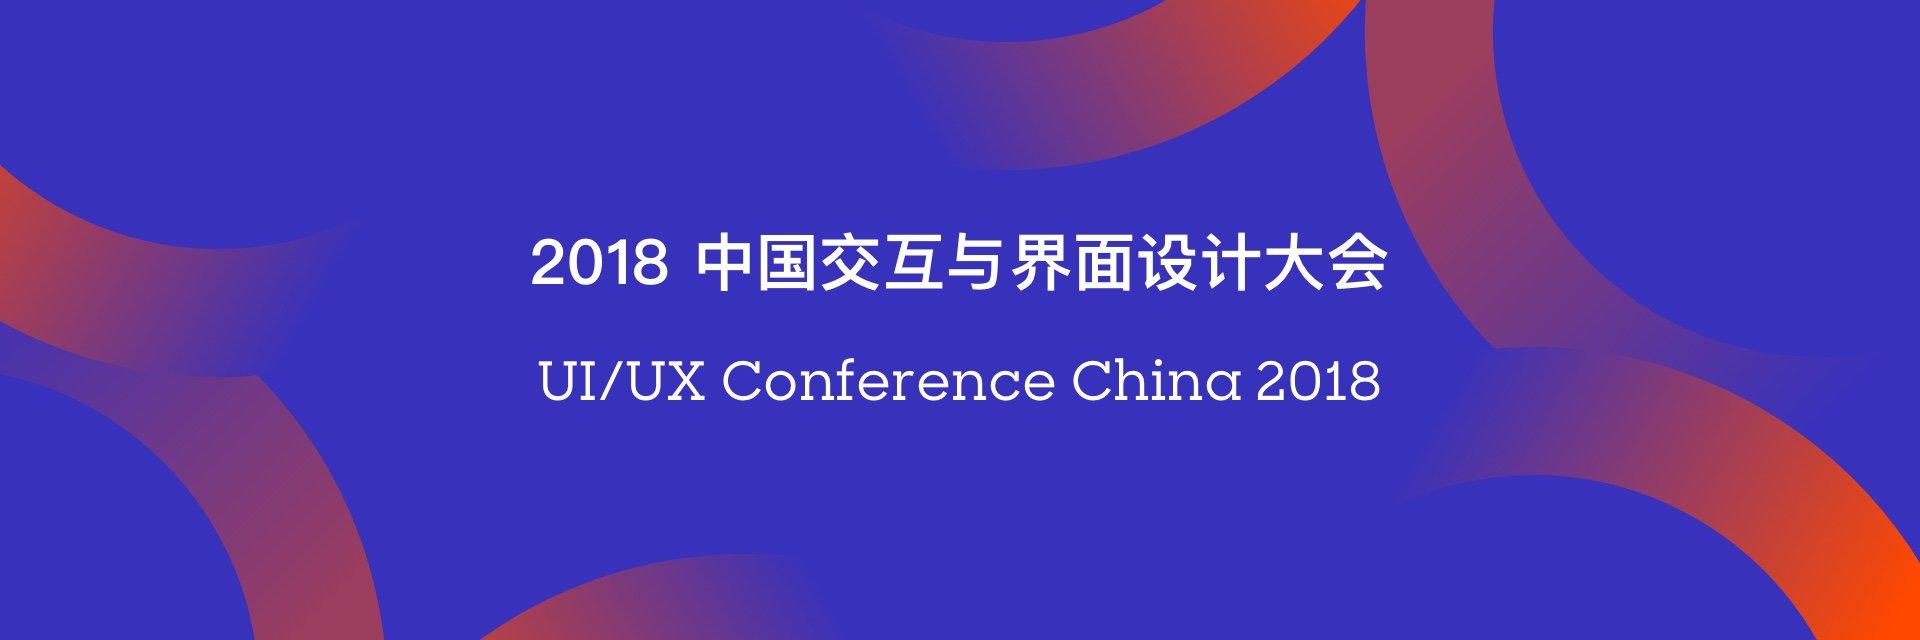 UI/UX Conference China 2018